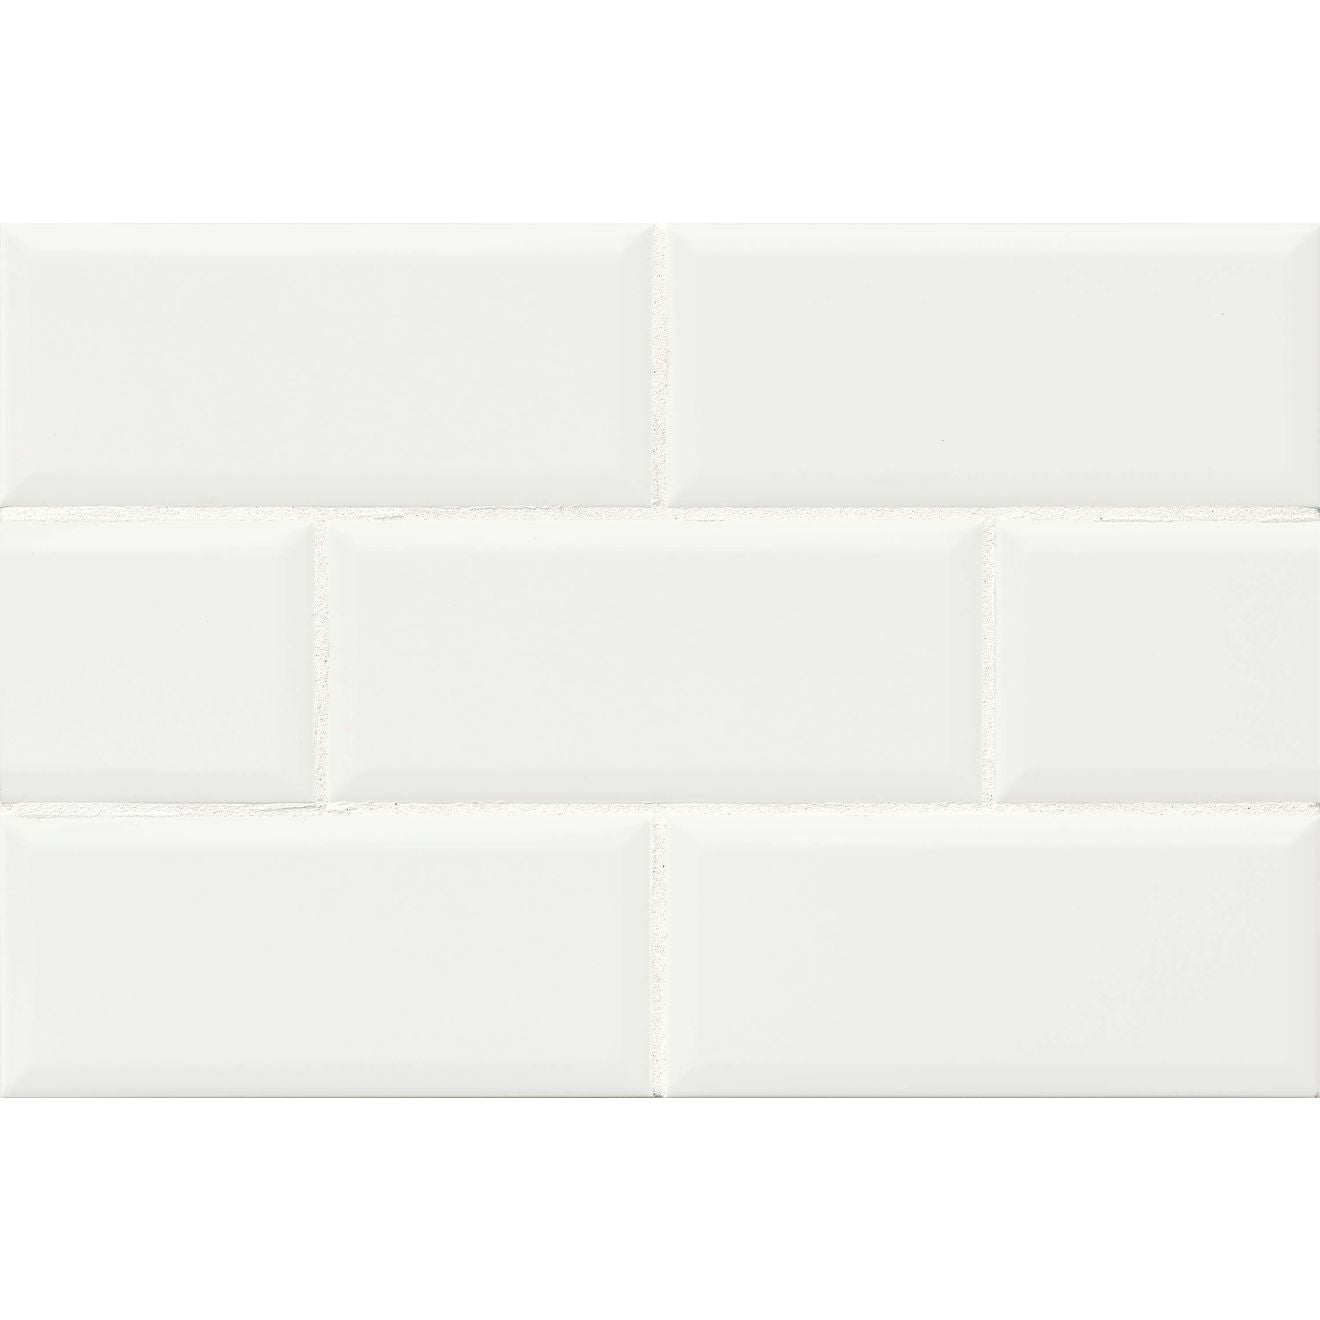 Traditions 3" x 6" Beveled Wall Tile